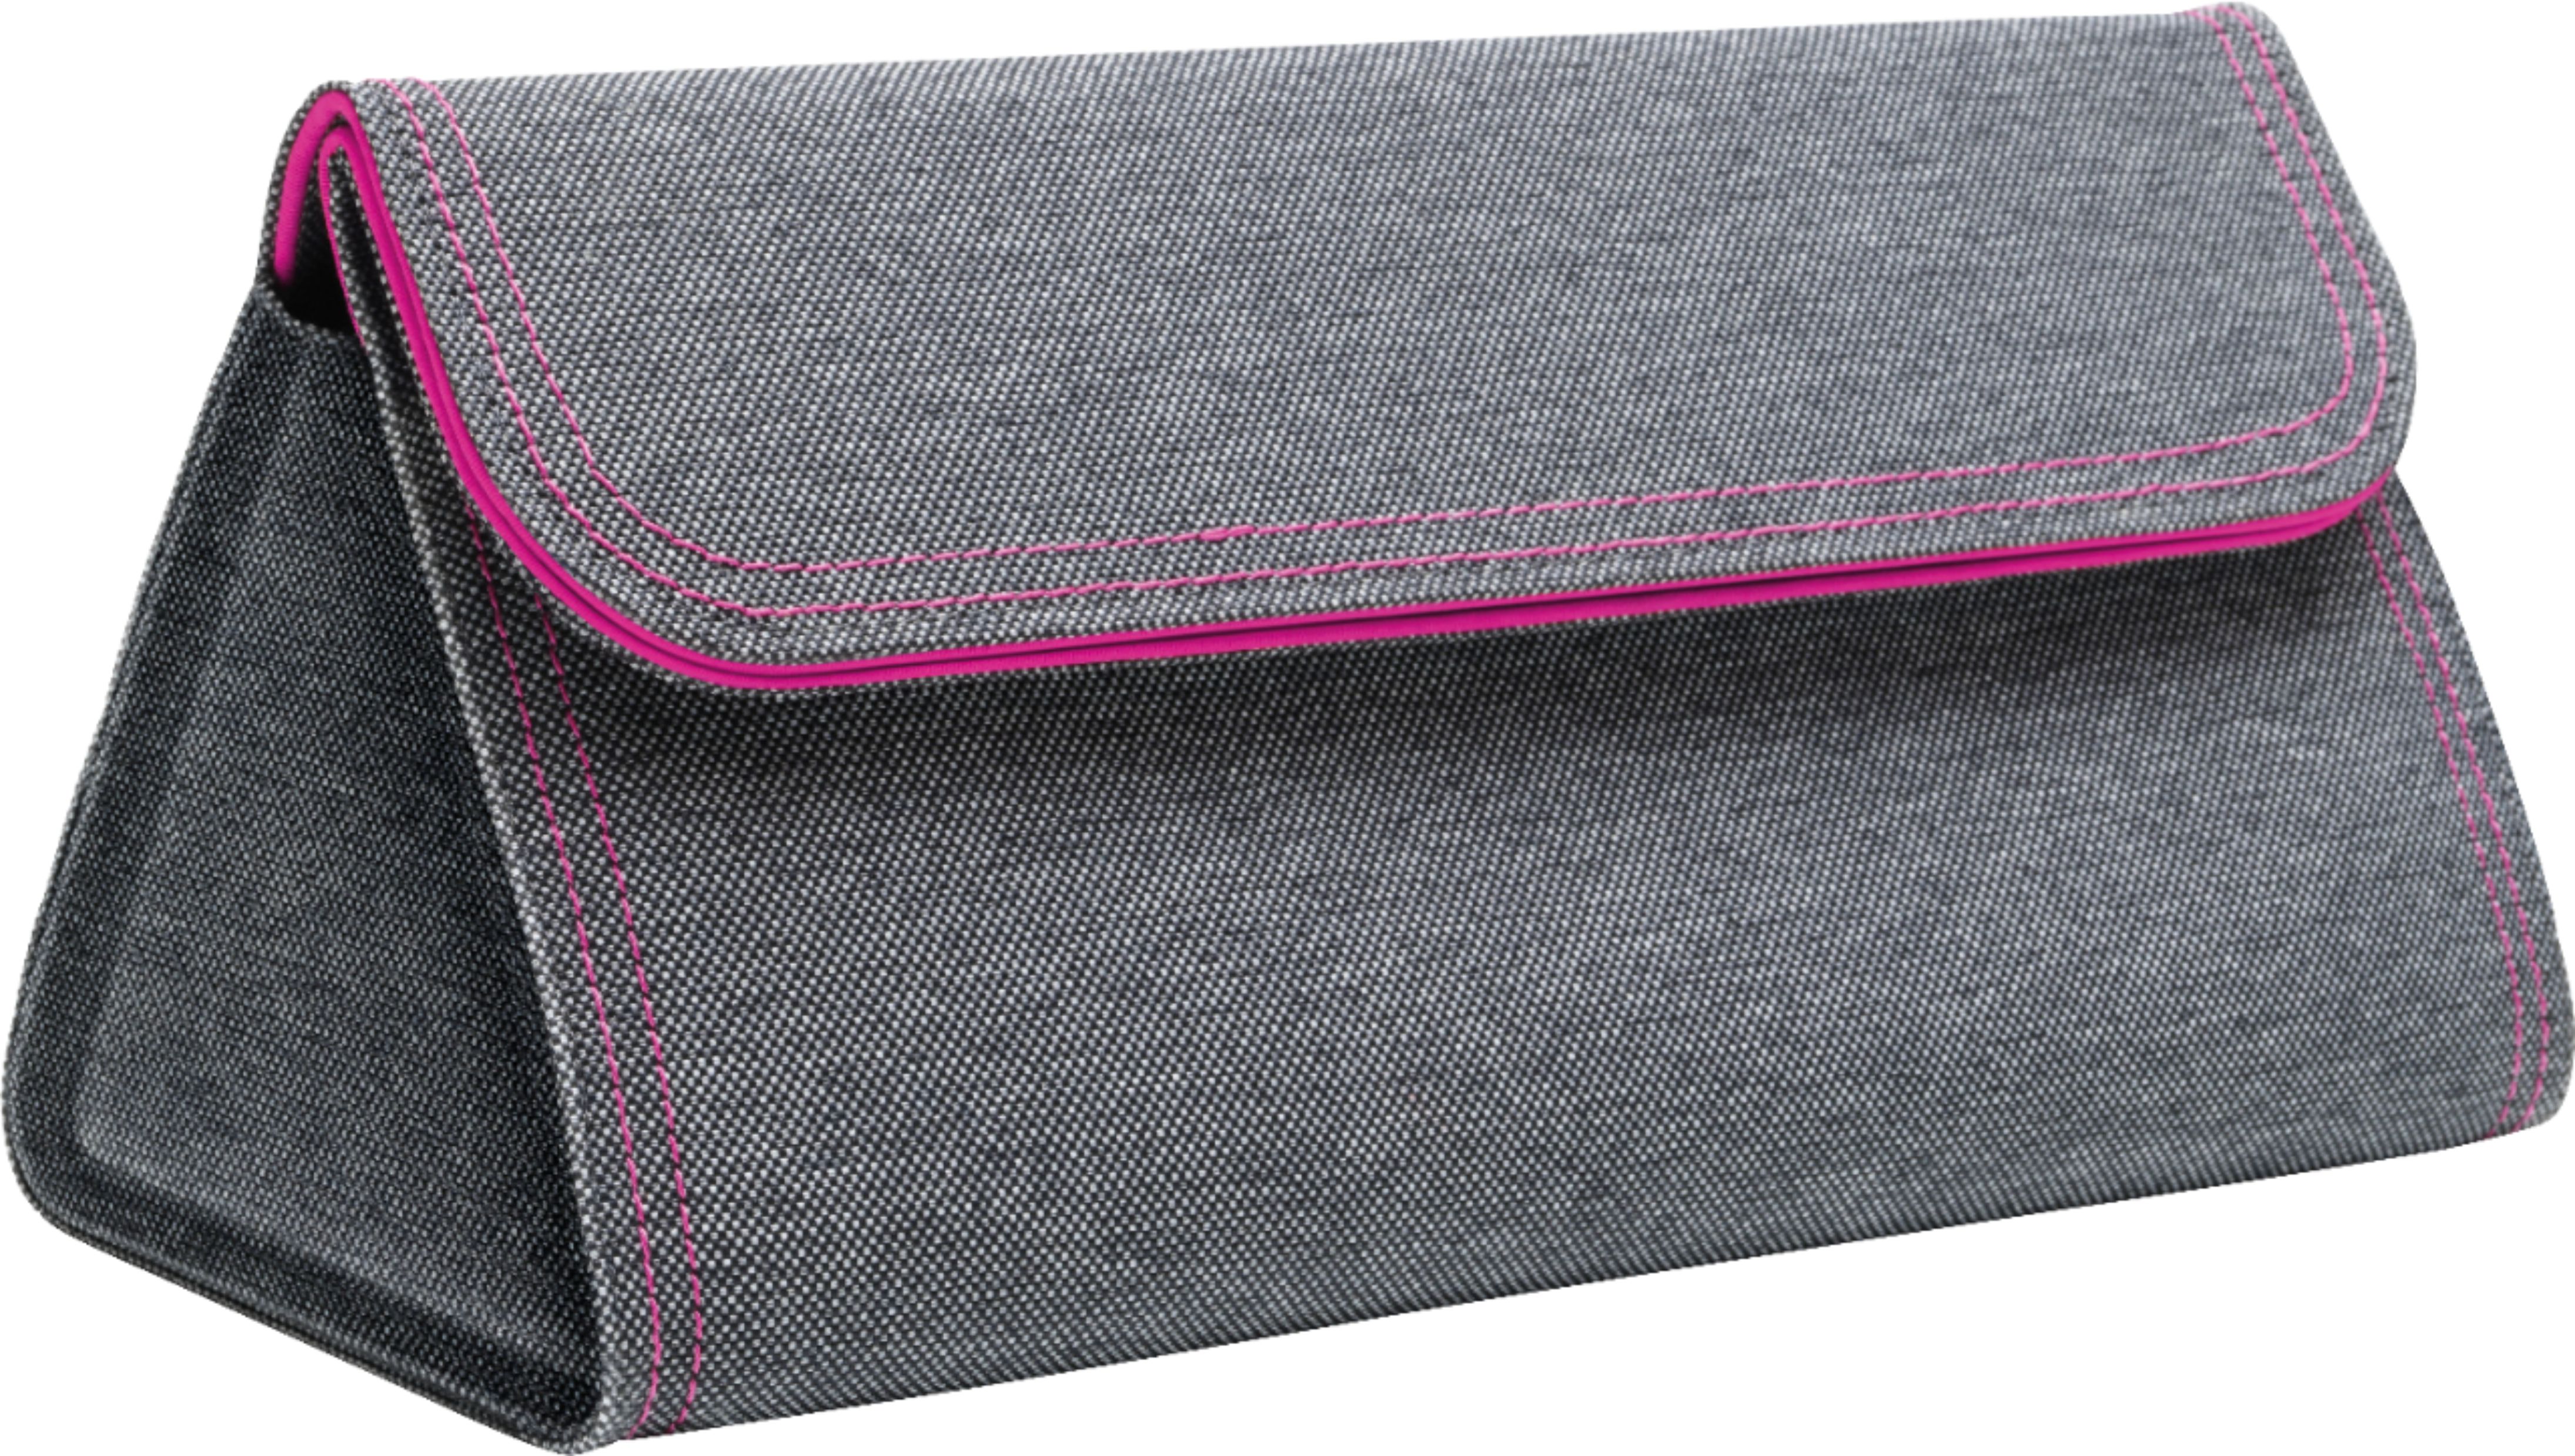 Angle View: Storage Bag for Dyson Supersonic Hair Dryer - Gray/Fuchsia